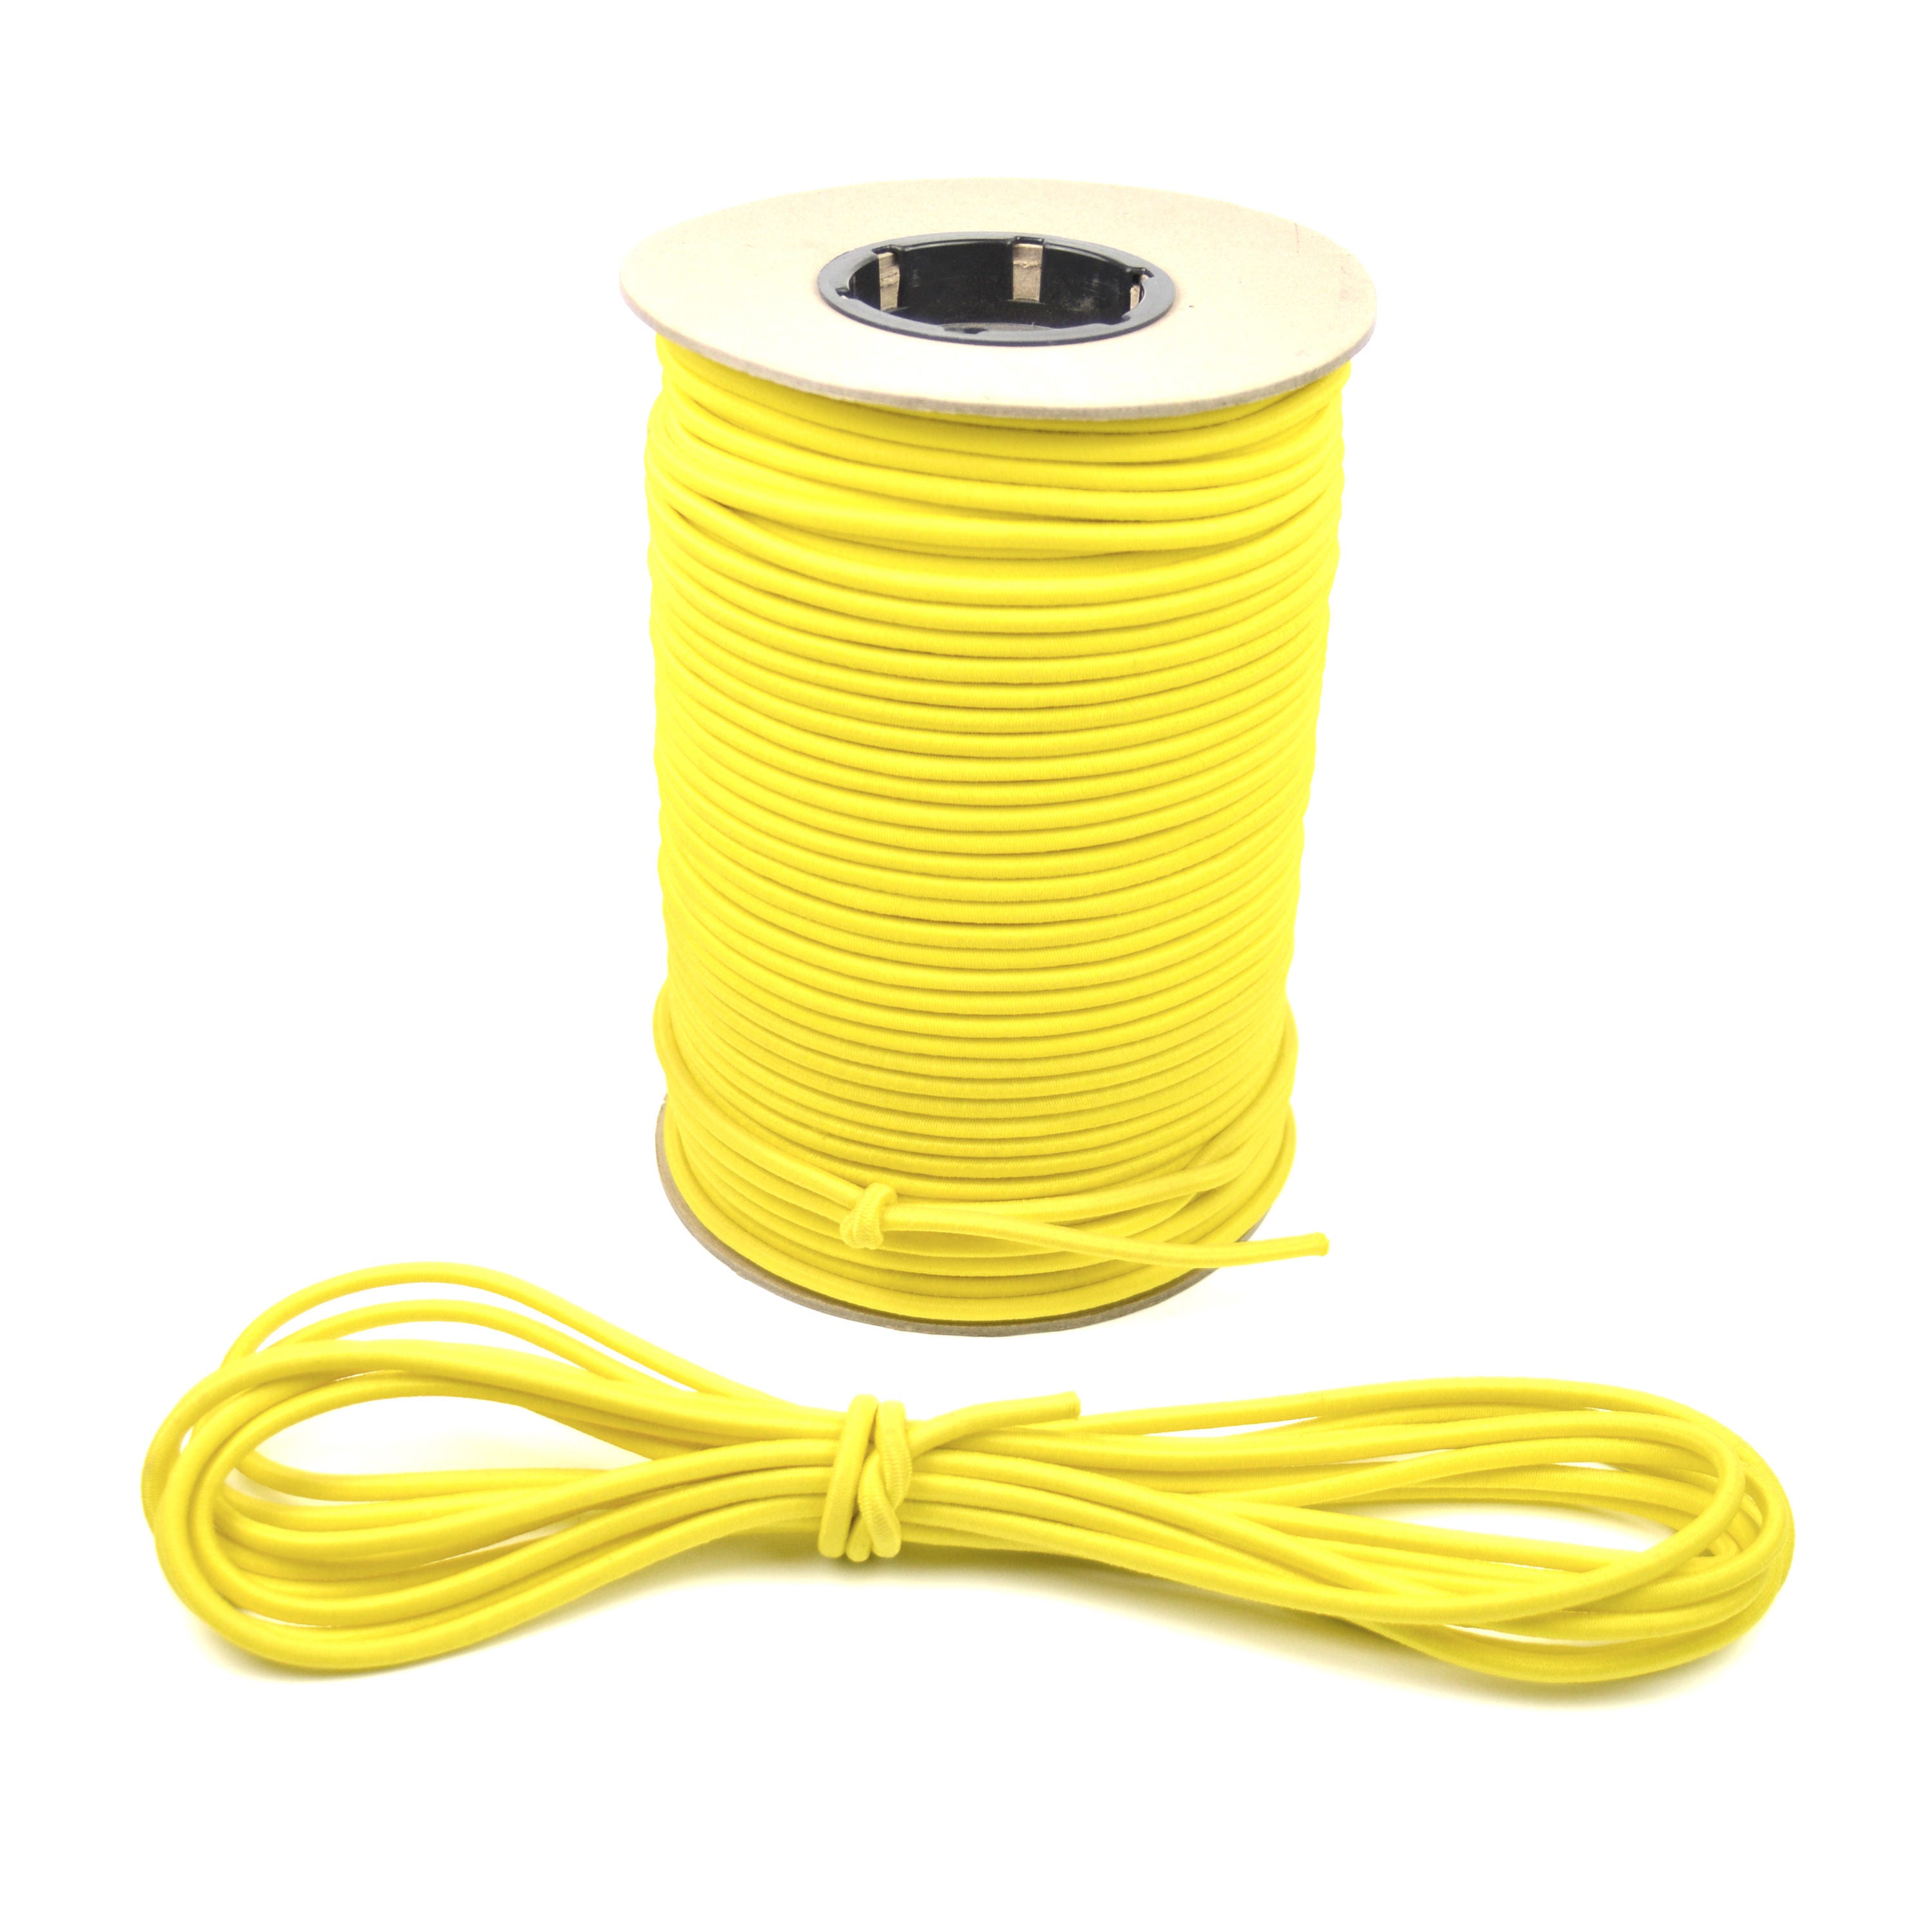 1/4 Inch Heavy Duty Bungee Cord Premium Grade Shock Cord Rope for Tie Downs 